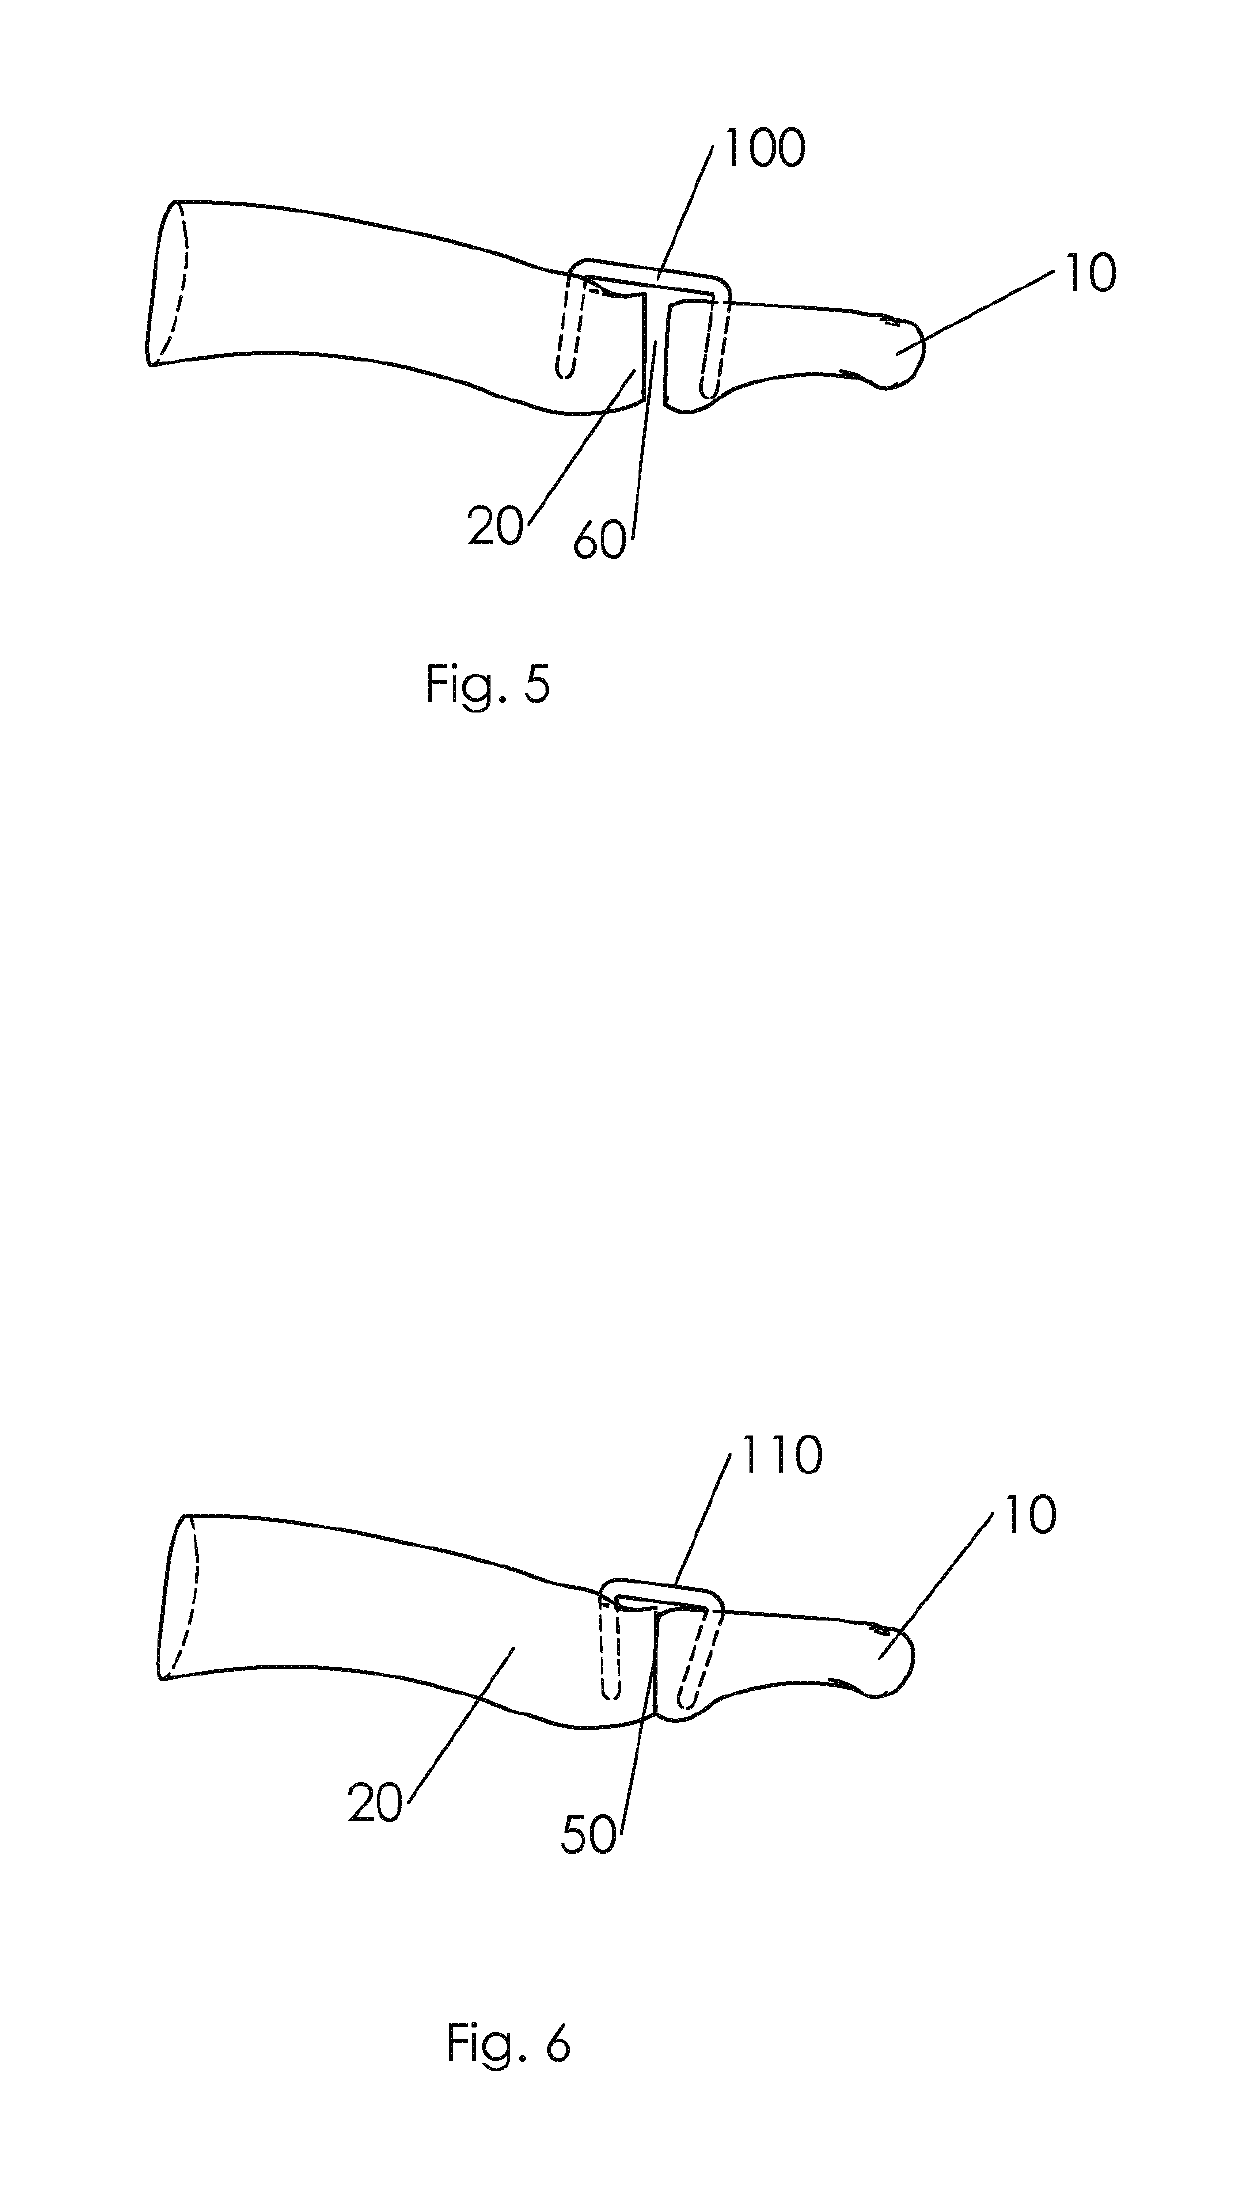 Shape changing bone implant and method of use for enhancing healing